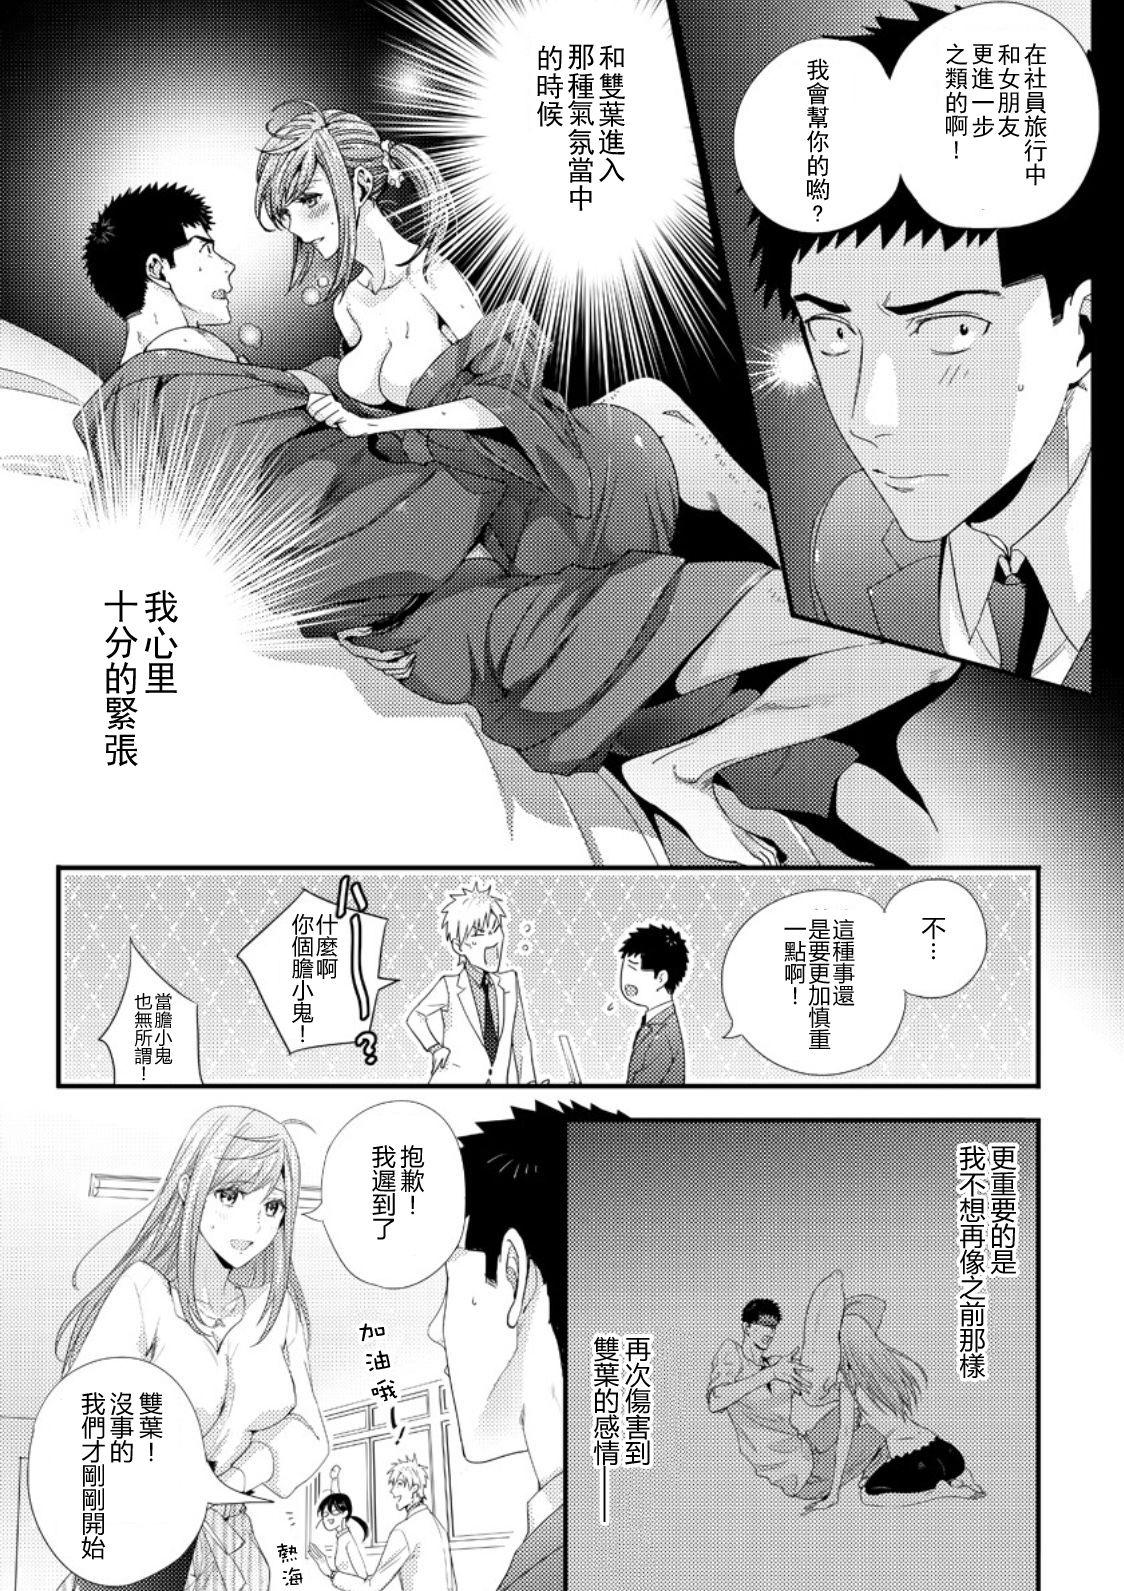 Please Let Me Hold You Futaba-San! Ch.1 4